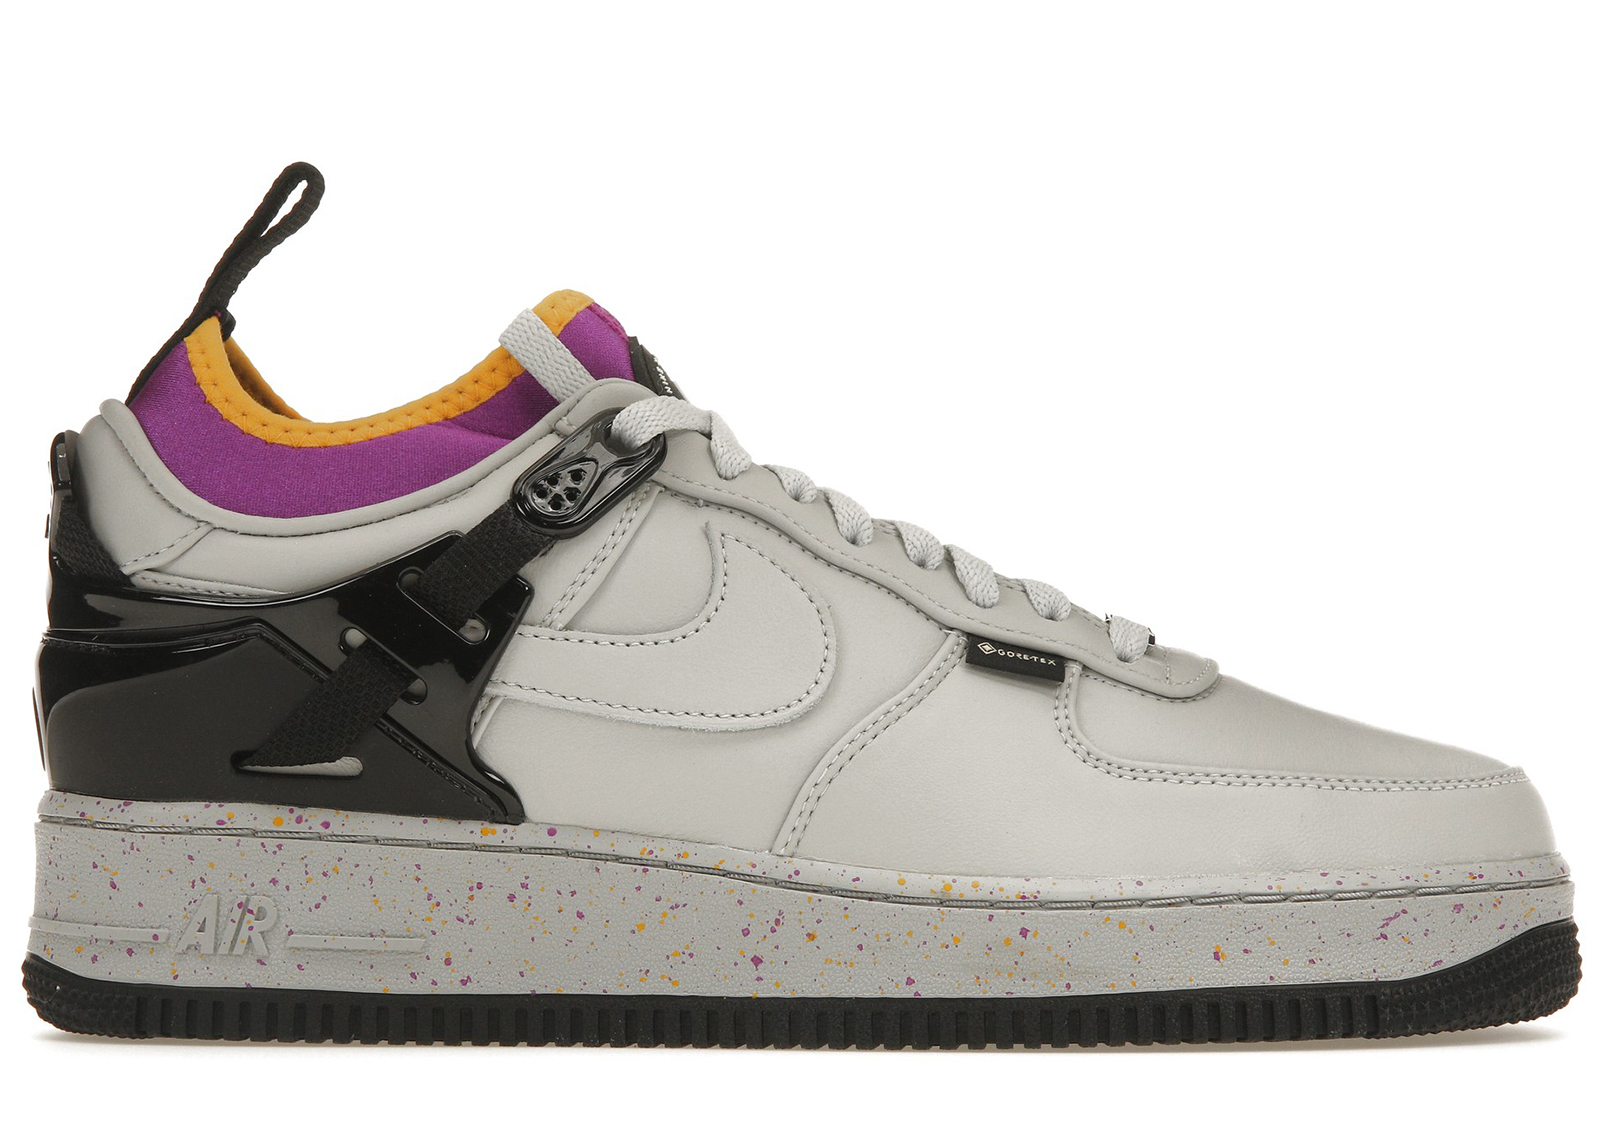 Nike Air Force 1 Low SP Undercover Grey Fog メンズ - DQ7558-001 - JP